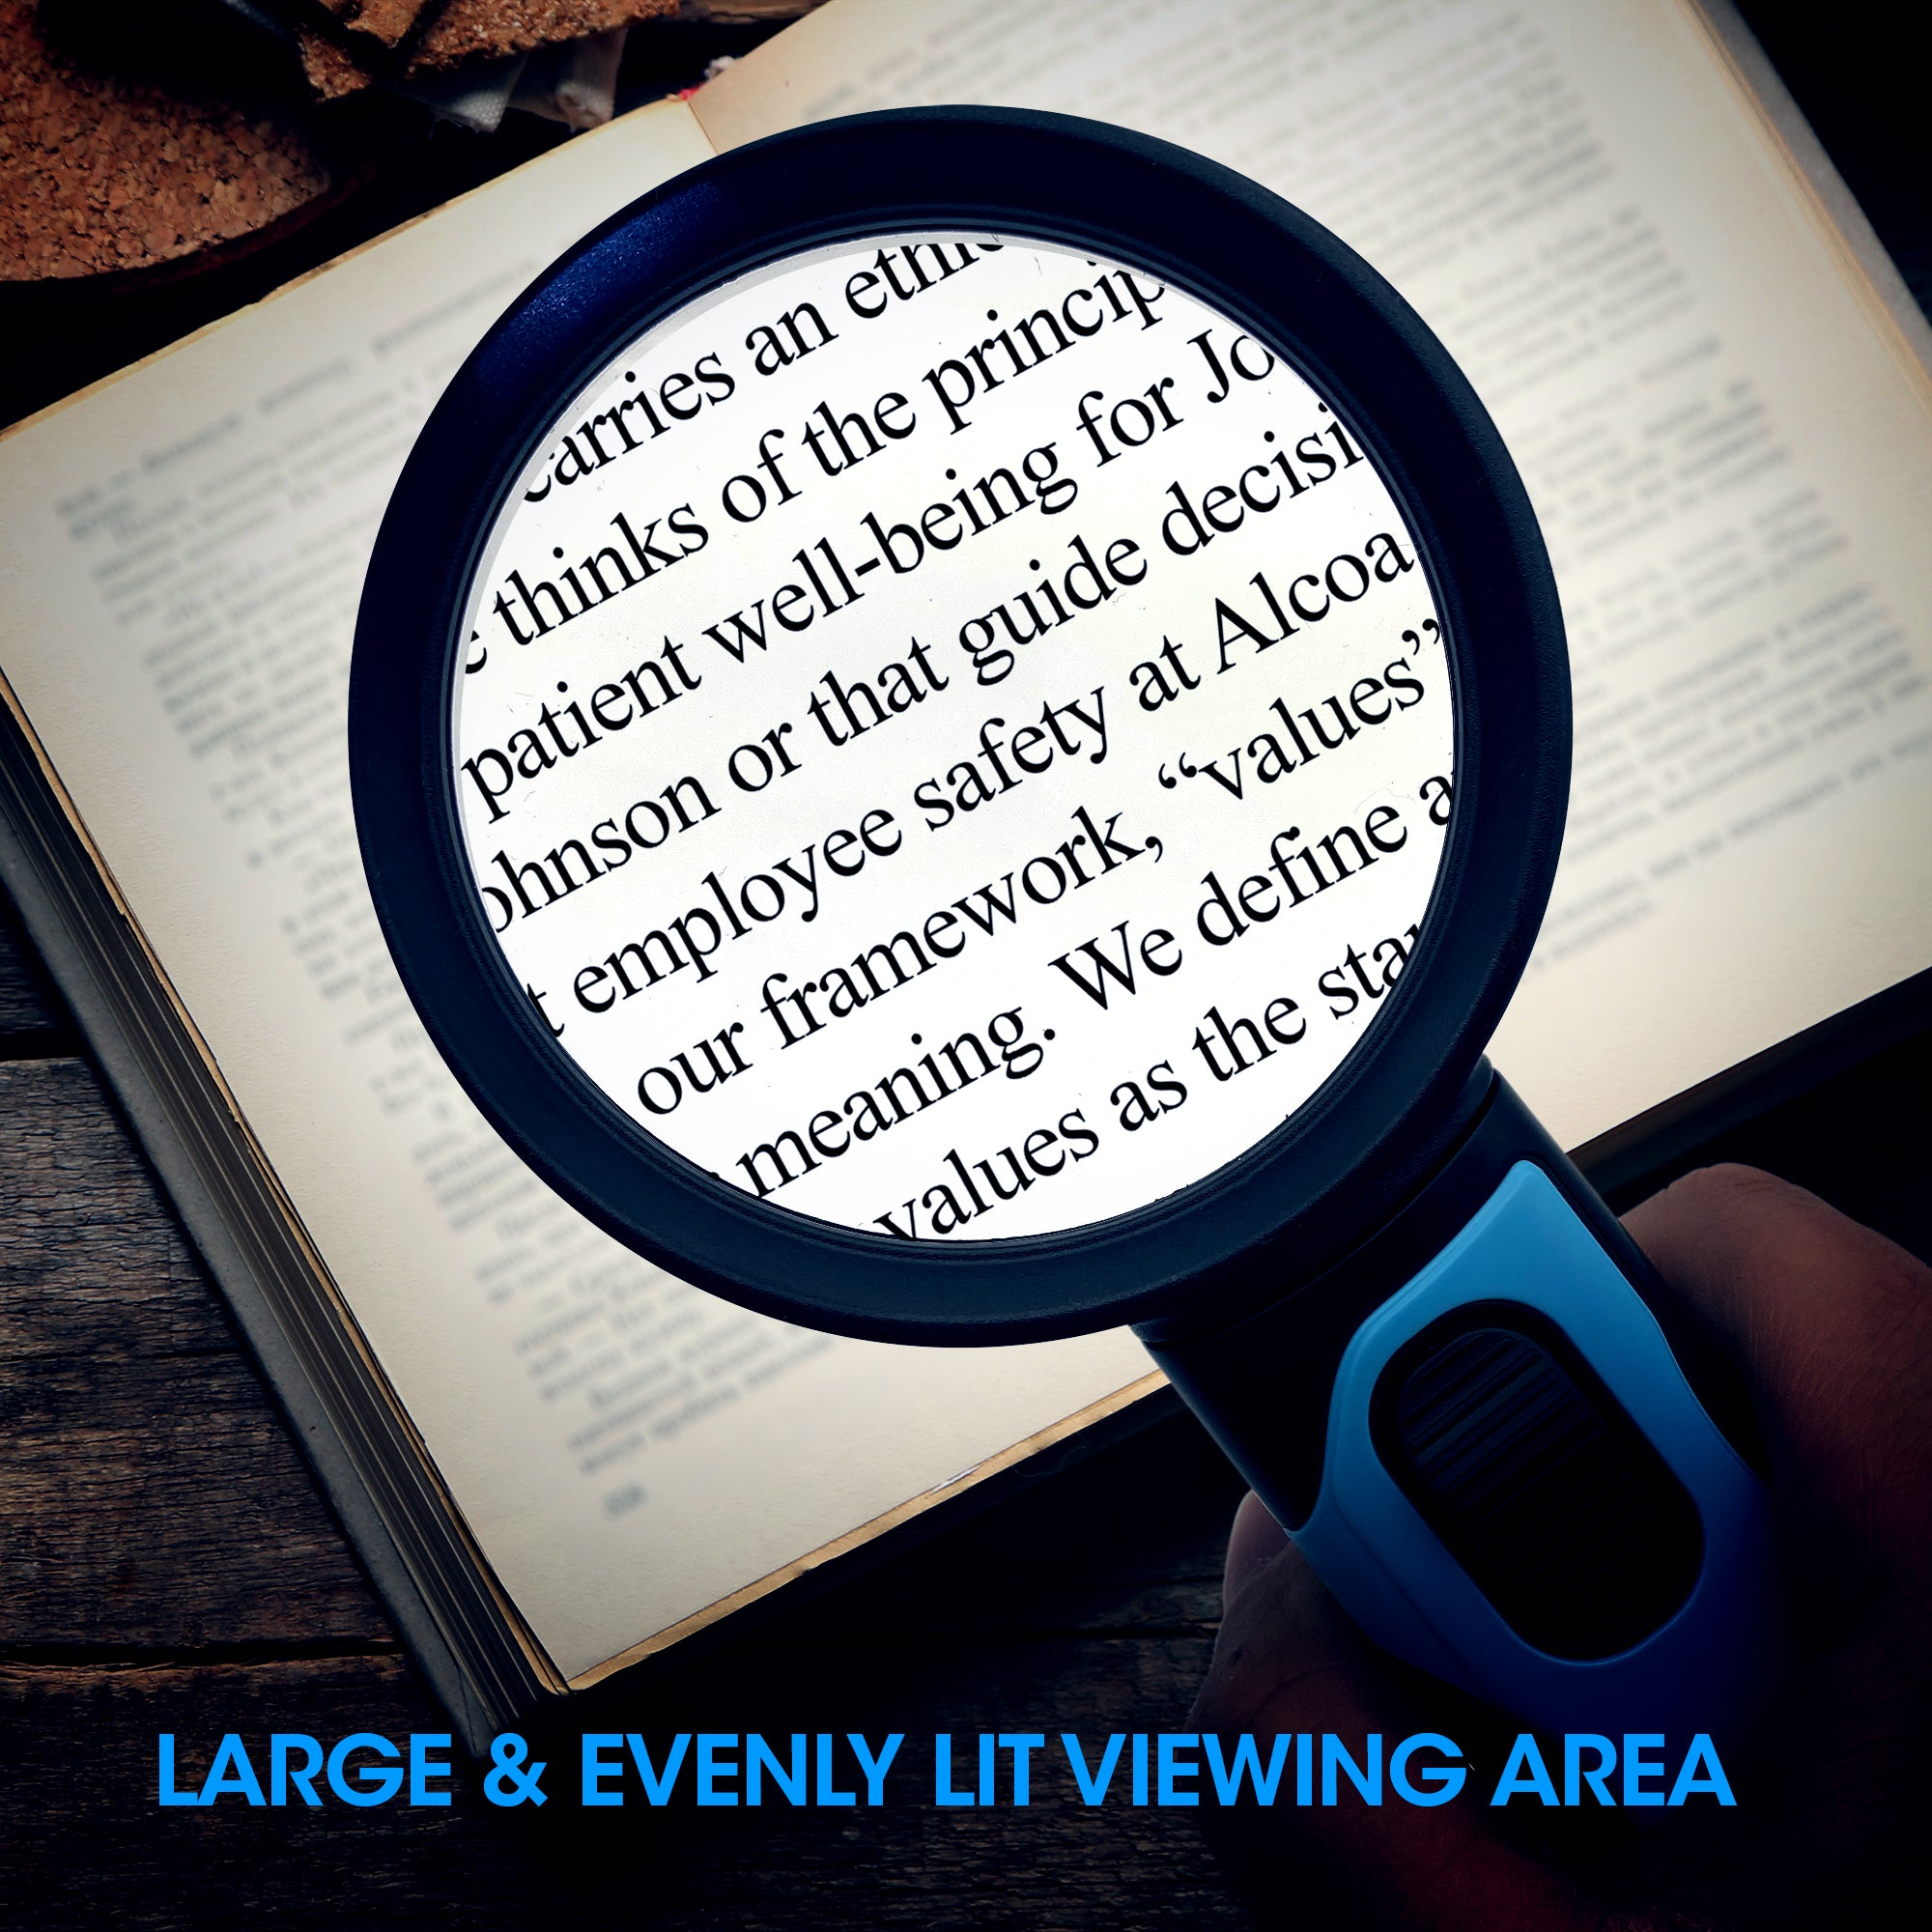 Extra Large 4X Magnifying Glass with 4 Ultra Bright LED Lights